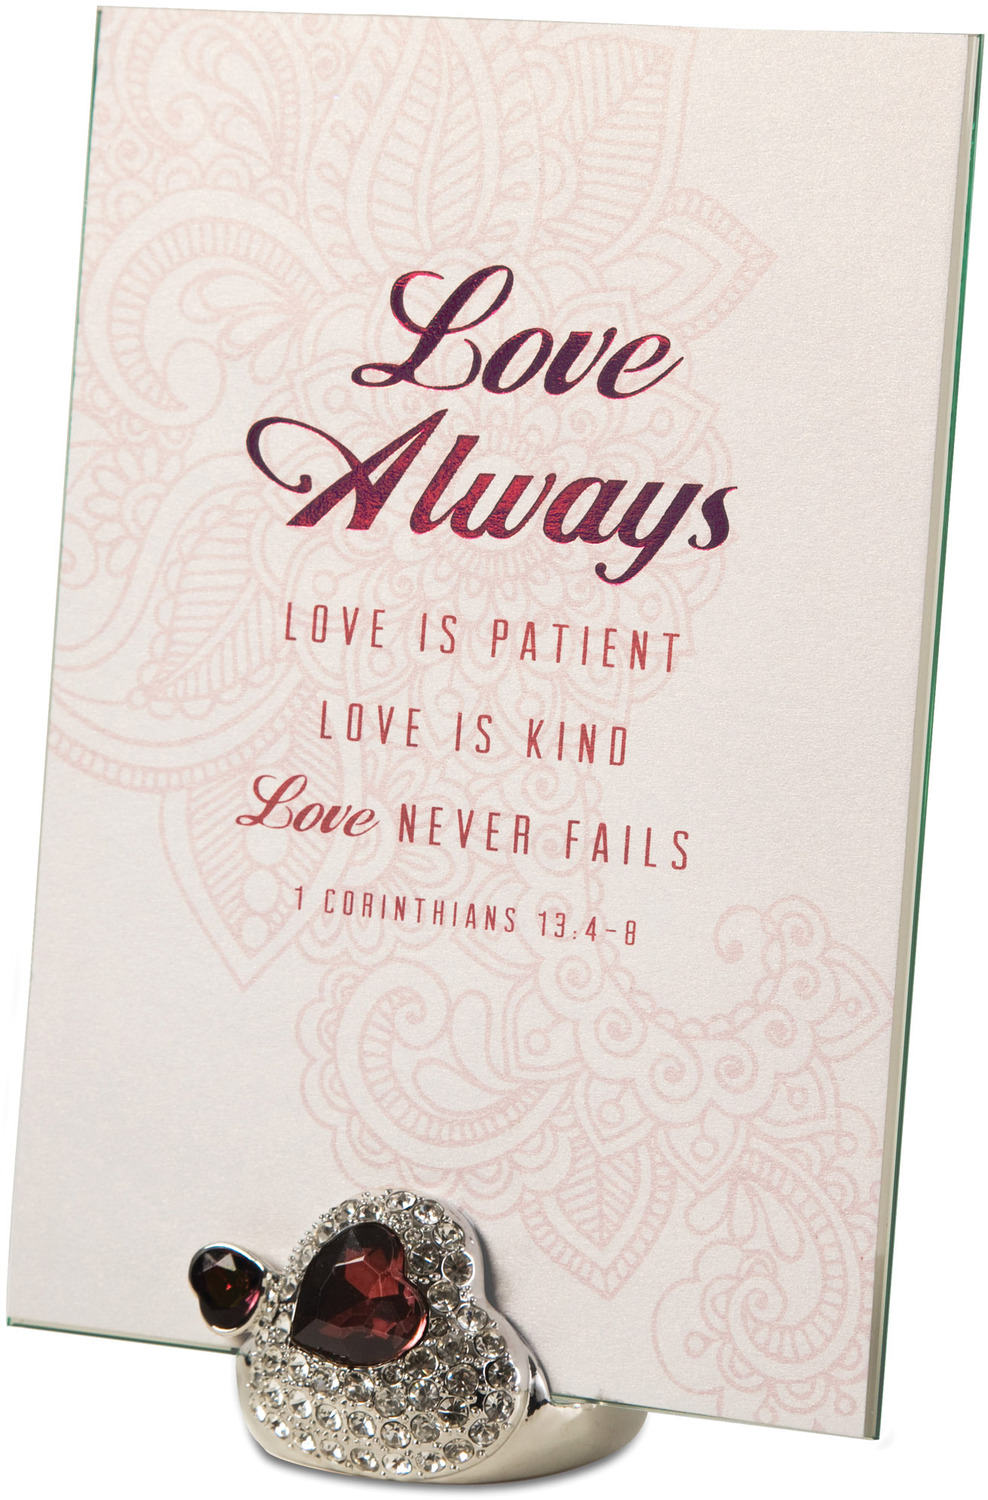 Love Always by Simply Shining - Love Always - 4" x 6" Jeweled Photo Frame